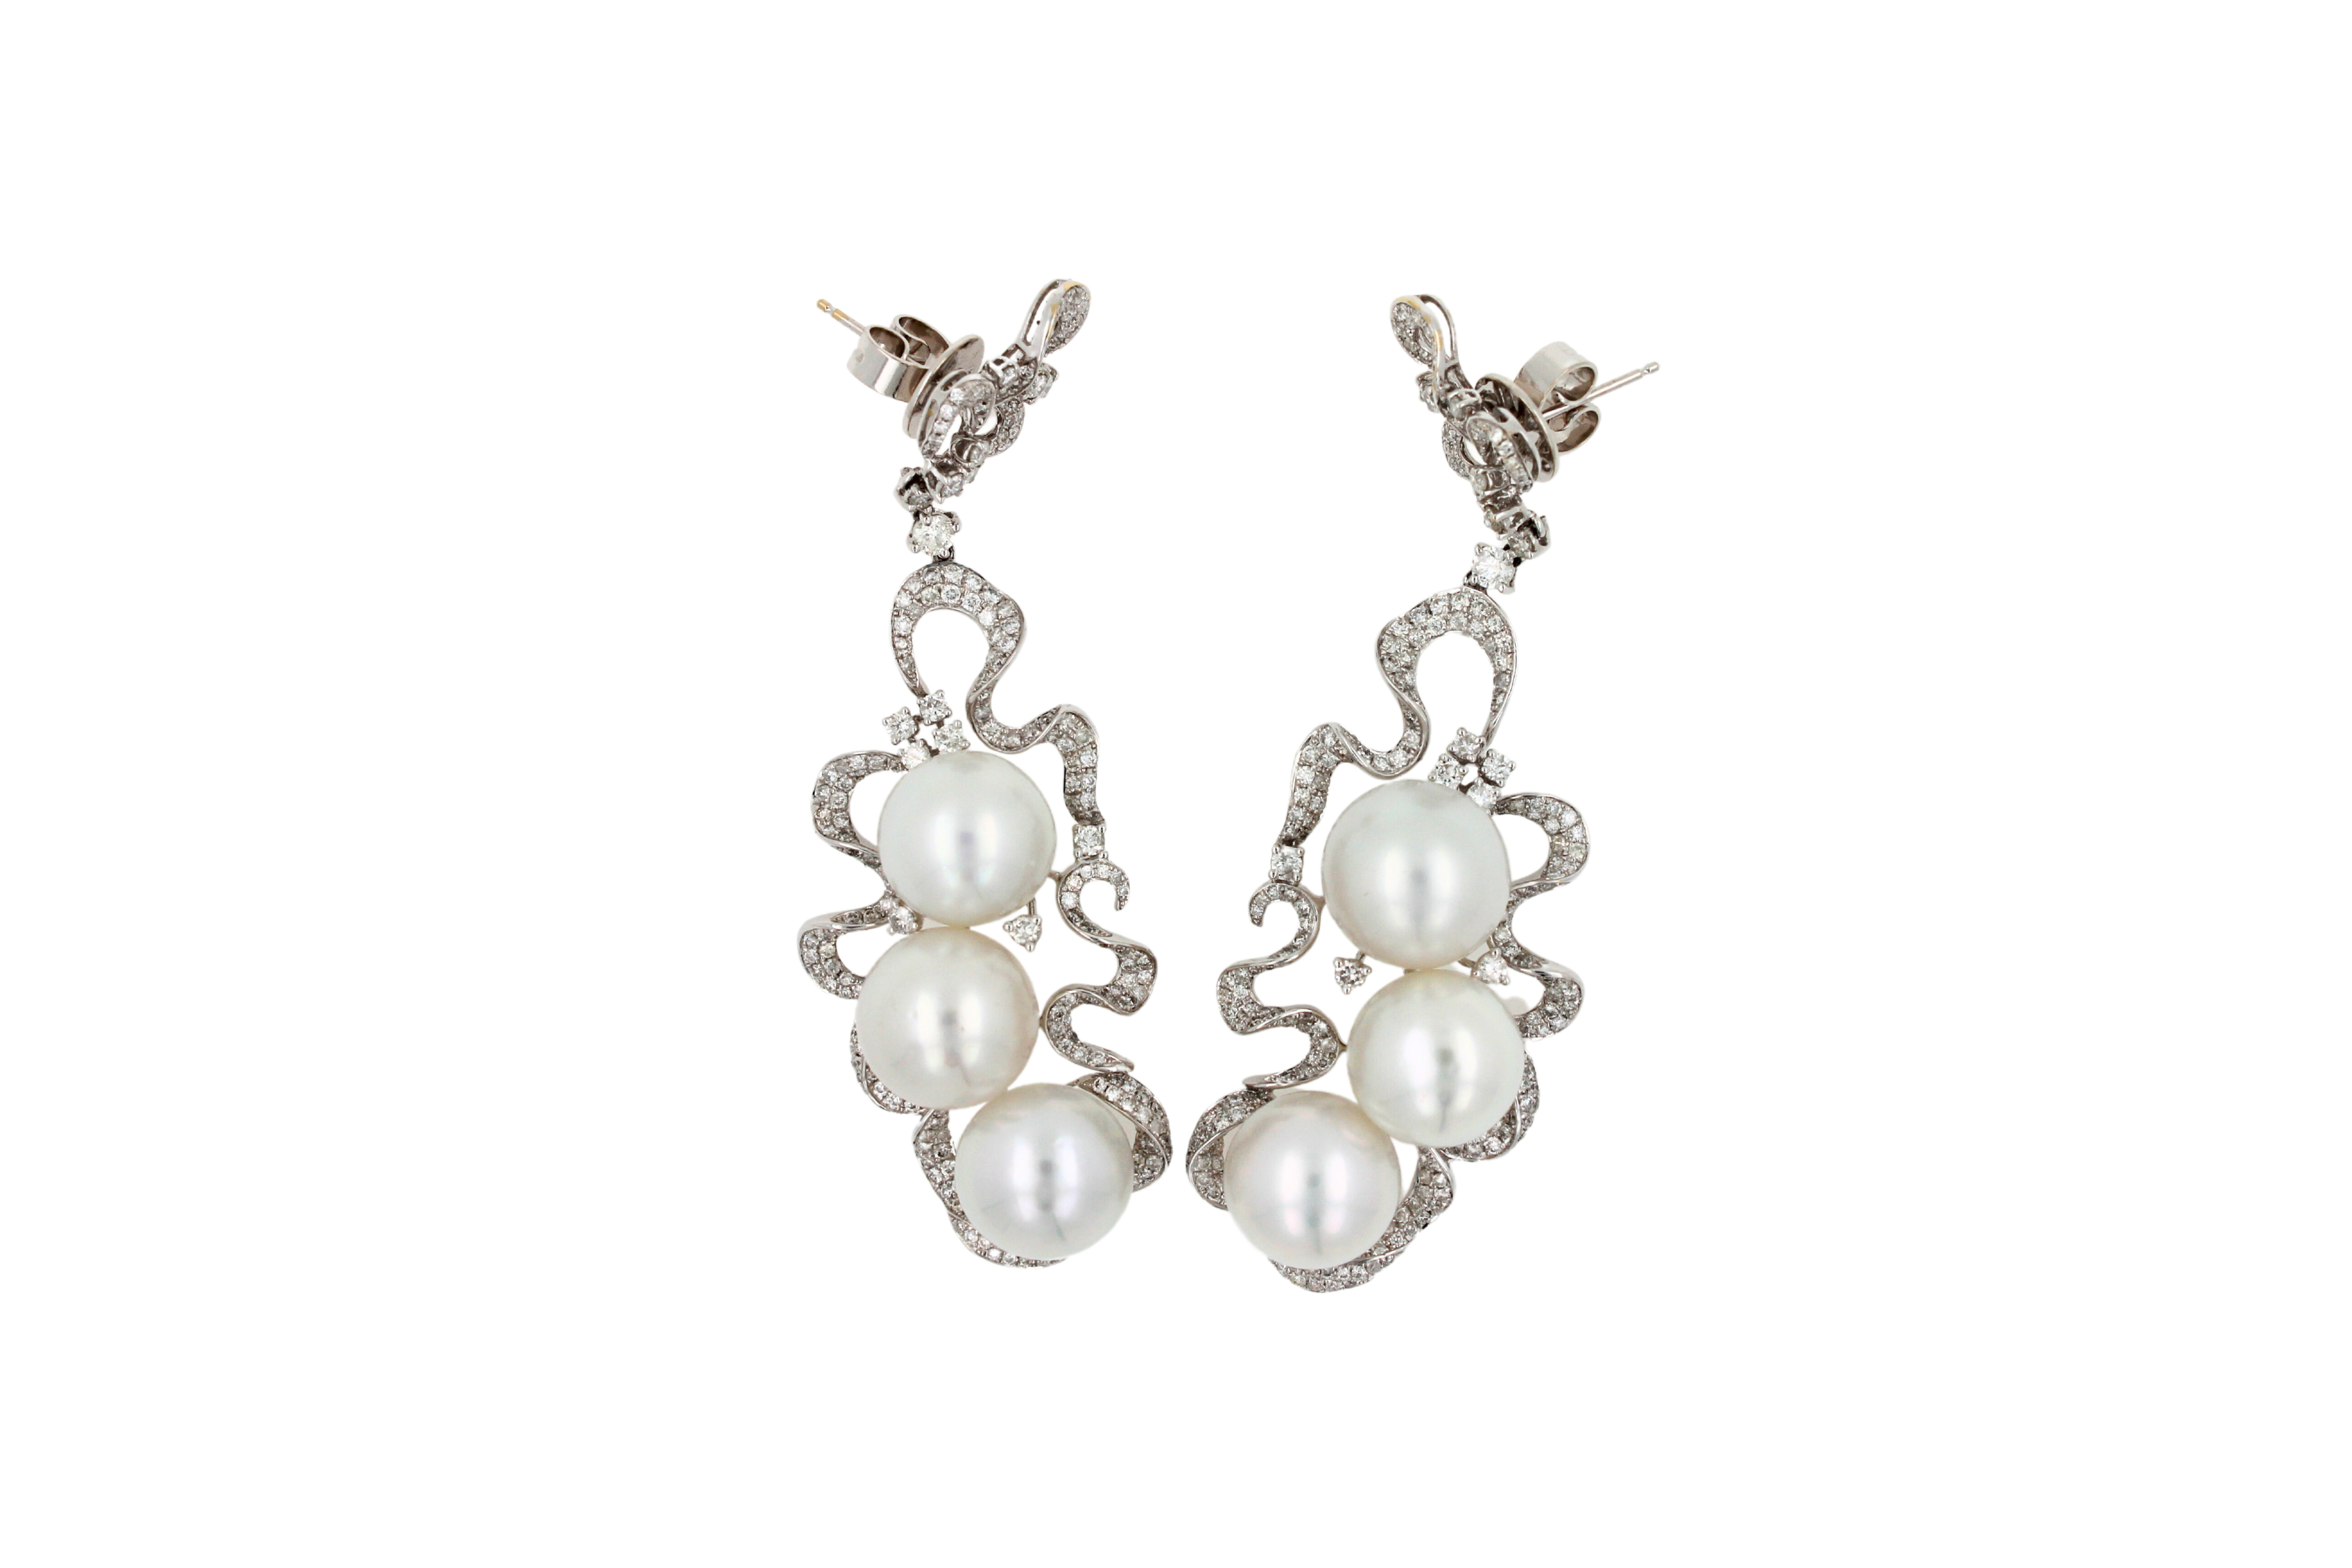 Beautiful Edwardian Style jewelry earrings. Very rare, unique and intricate handmade design that is one-of-a-kind and is not easily replicated. 

Full Details:
18 Karat White Gold
White South Sea Pearls 12-13mm Diameter Size
AAA Quality 
Mirror-like